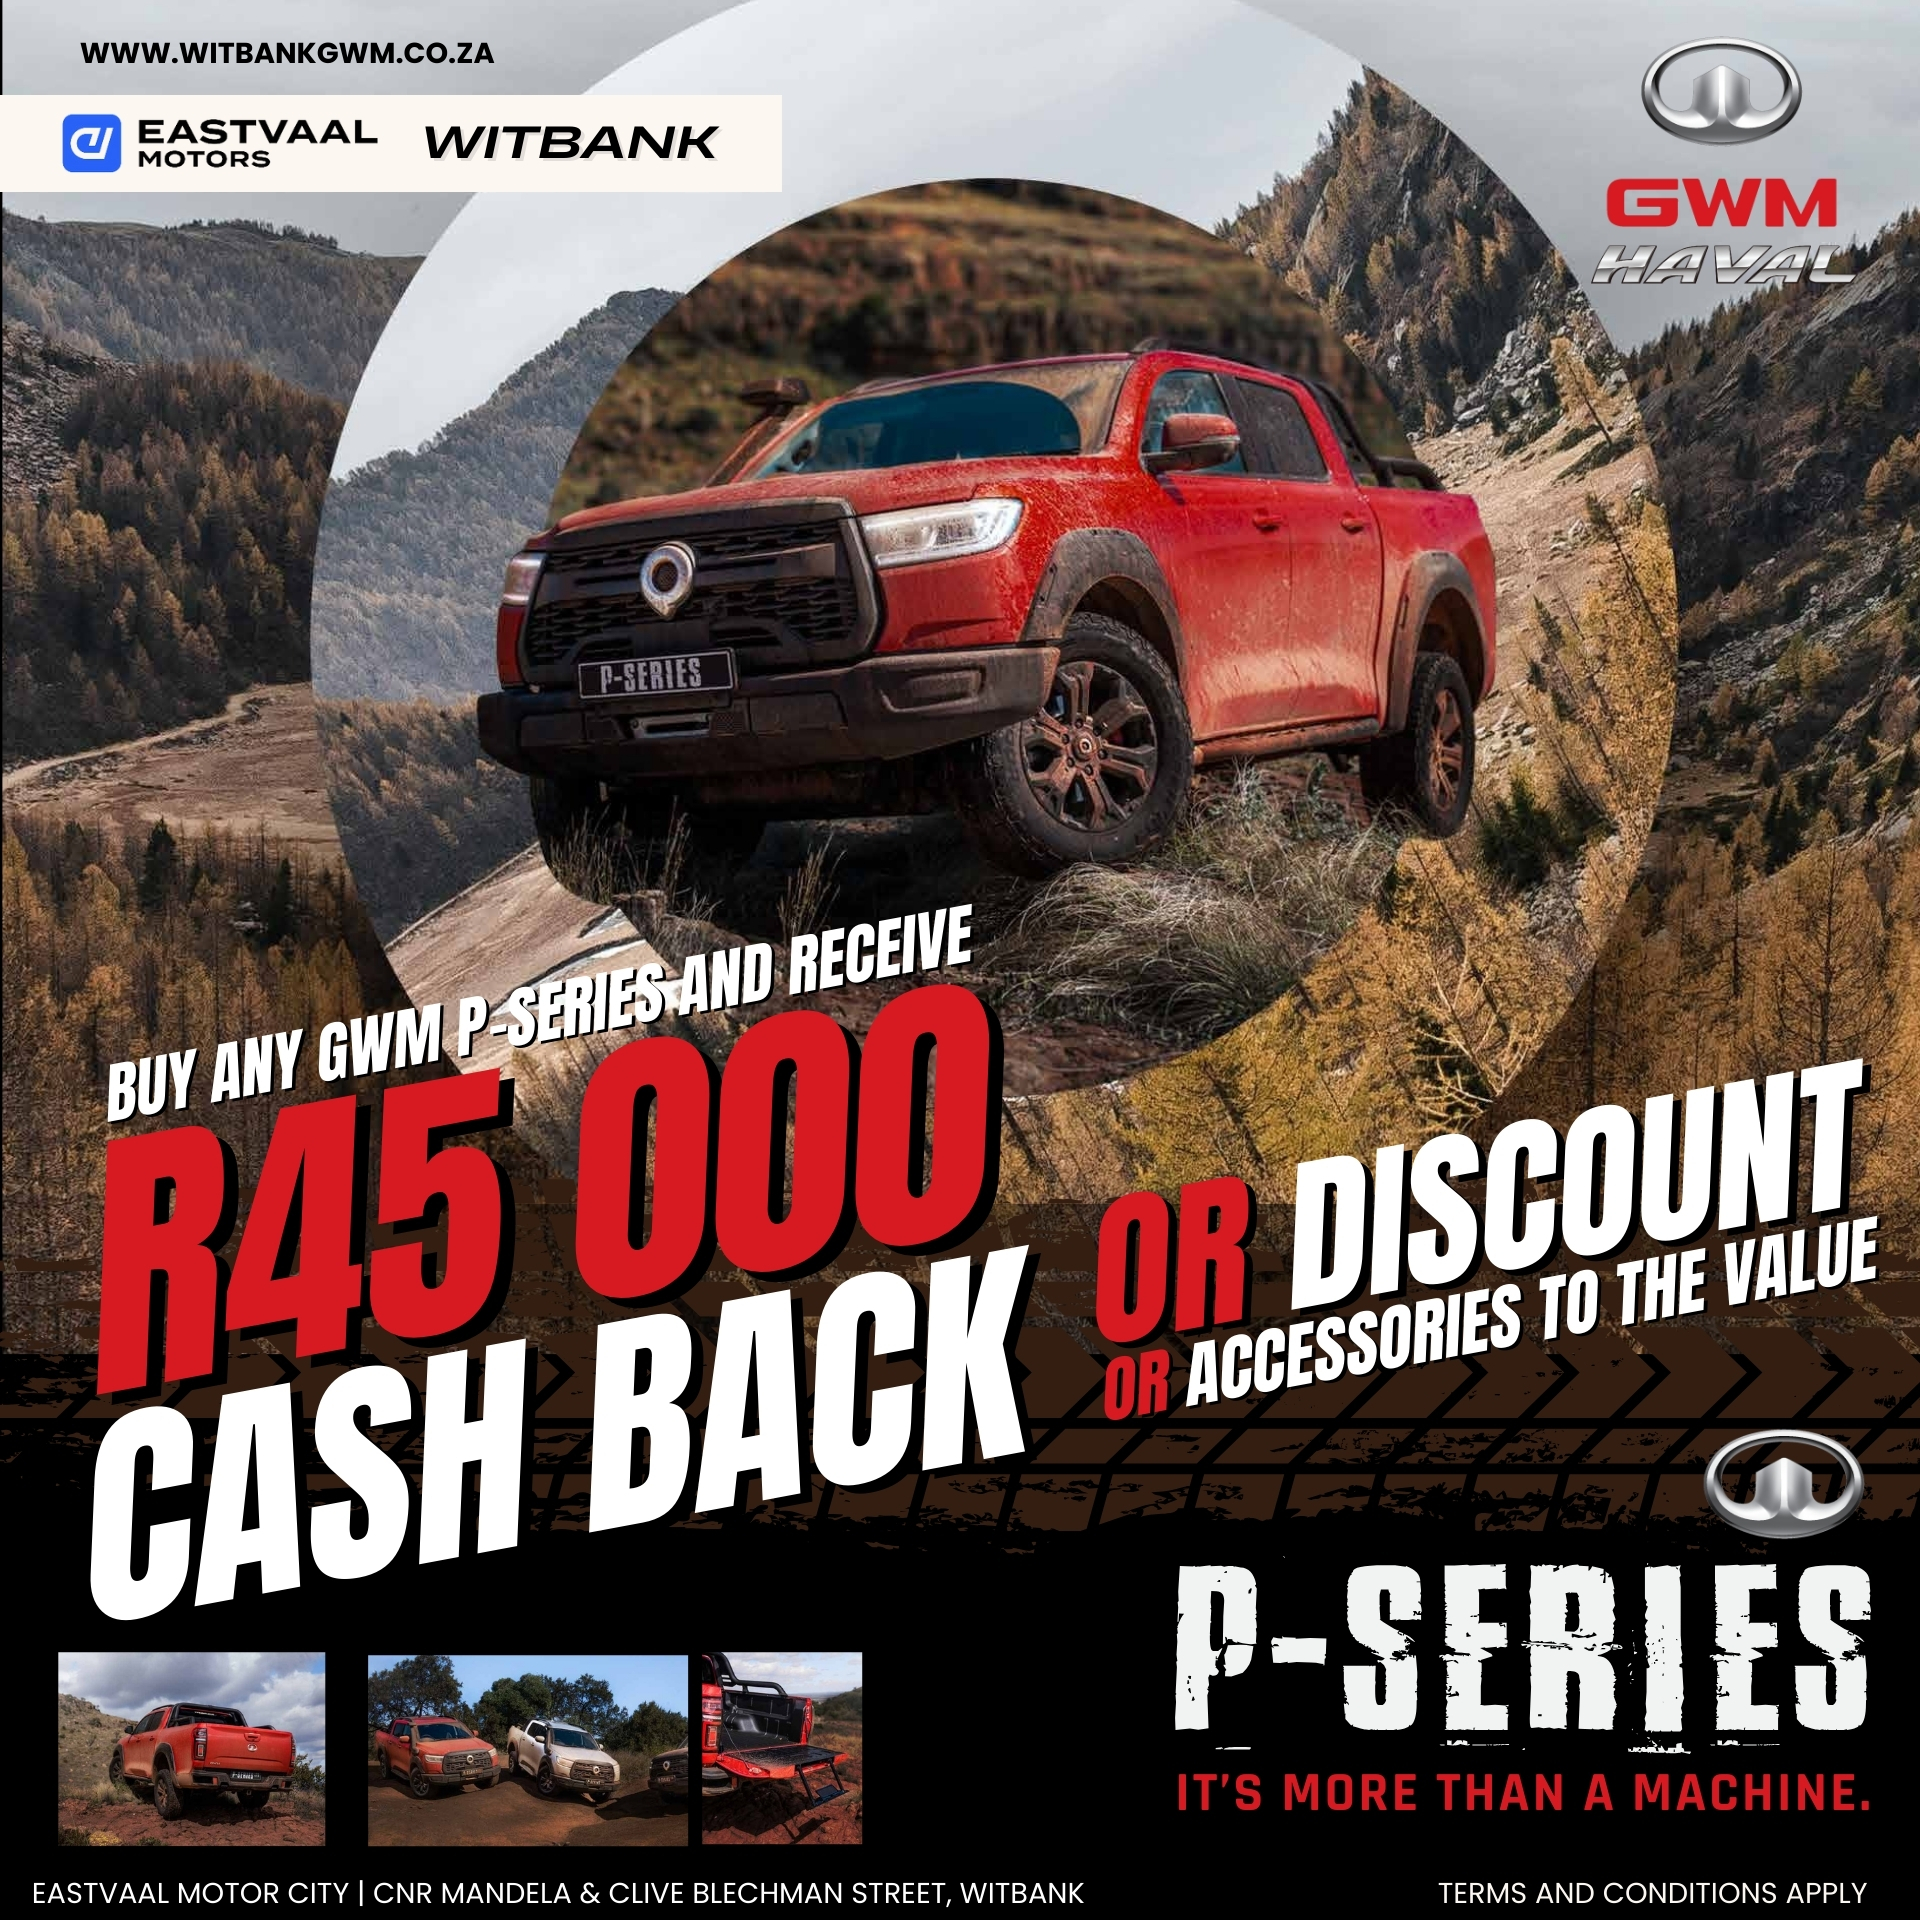 Buy Any GWM P-Series This April image from Eastvaal Motors